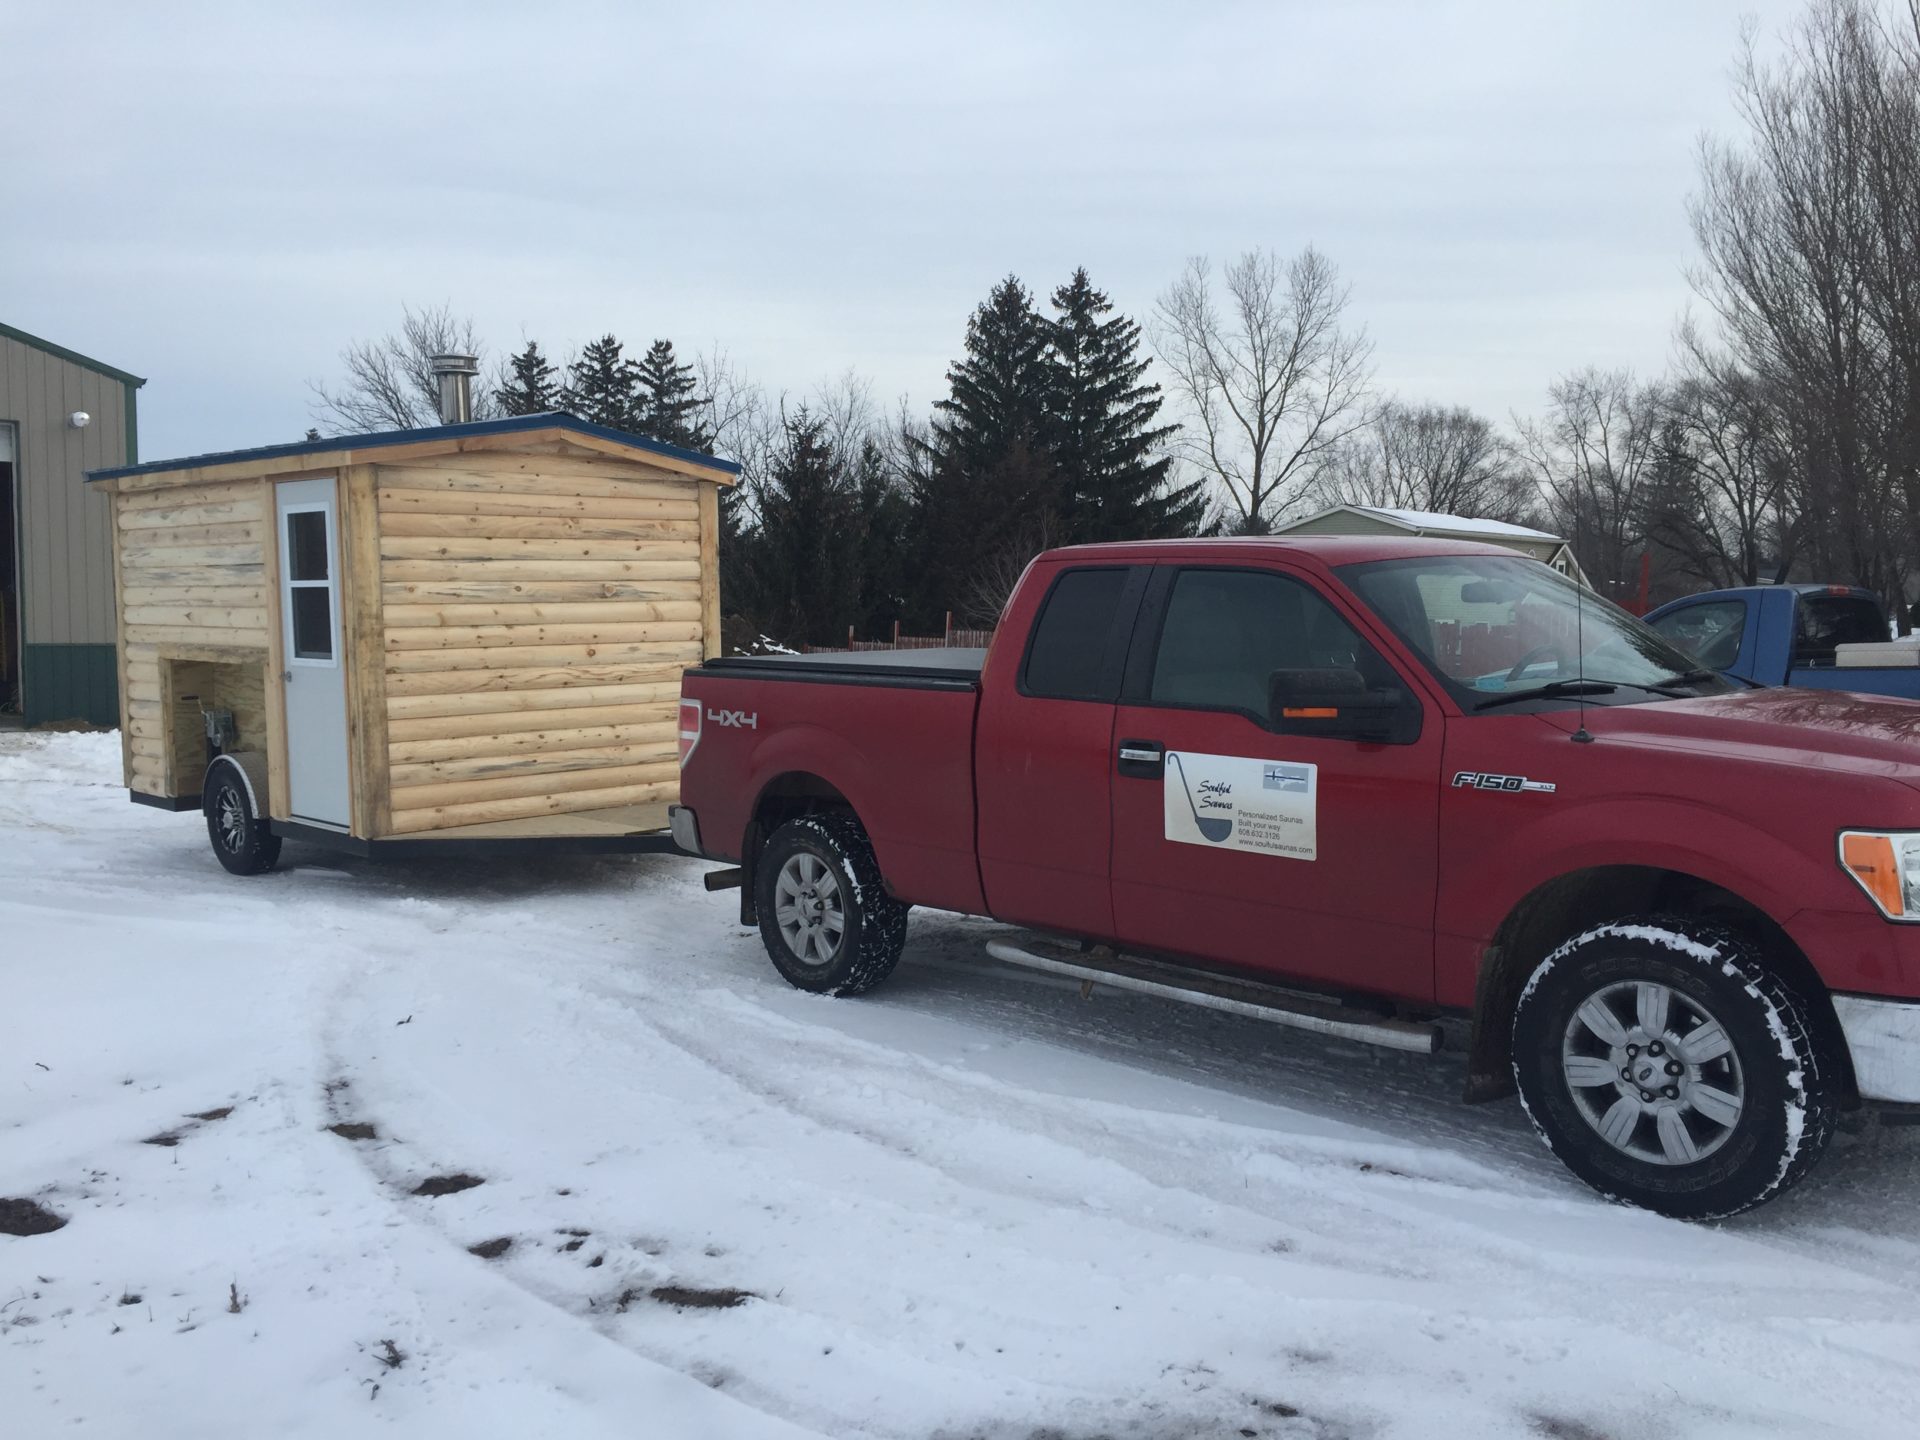 Sauna Rental on trailer with delivery truck